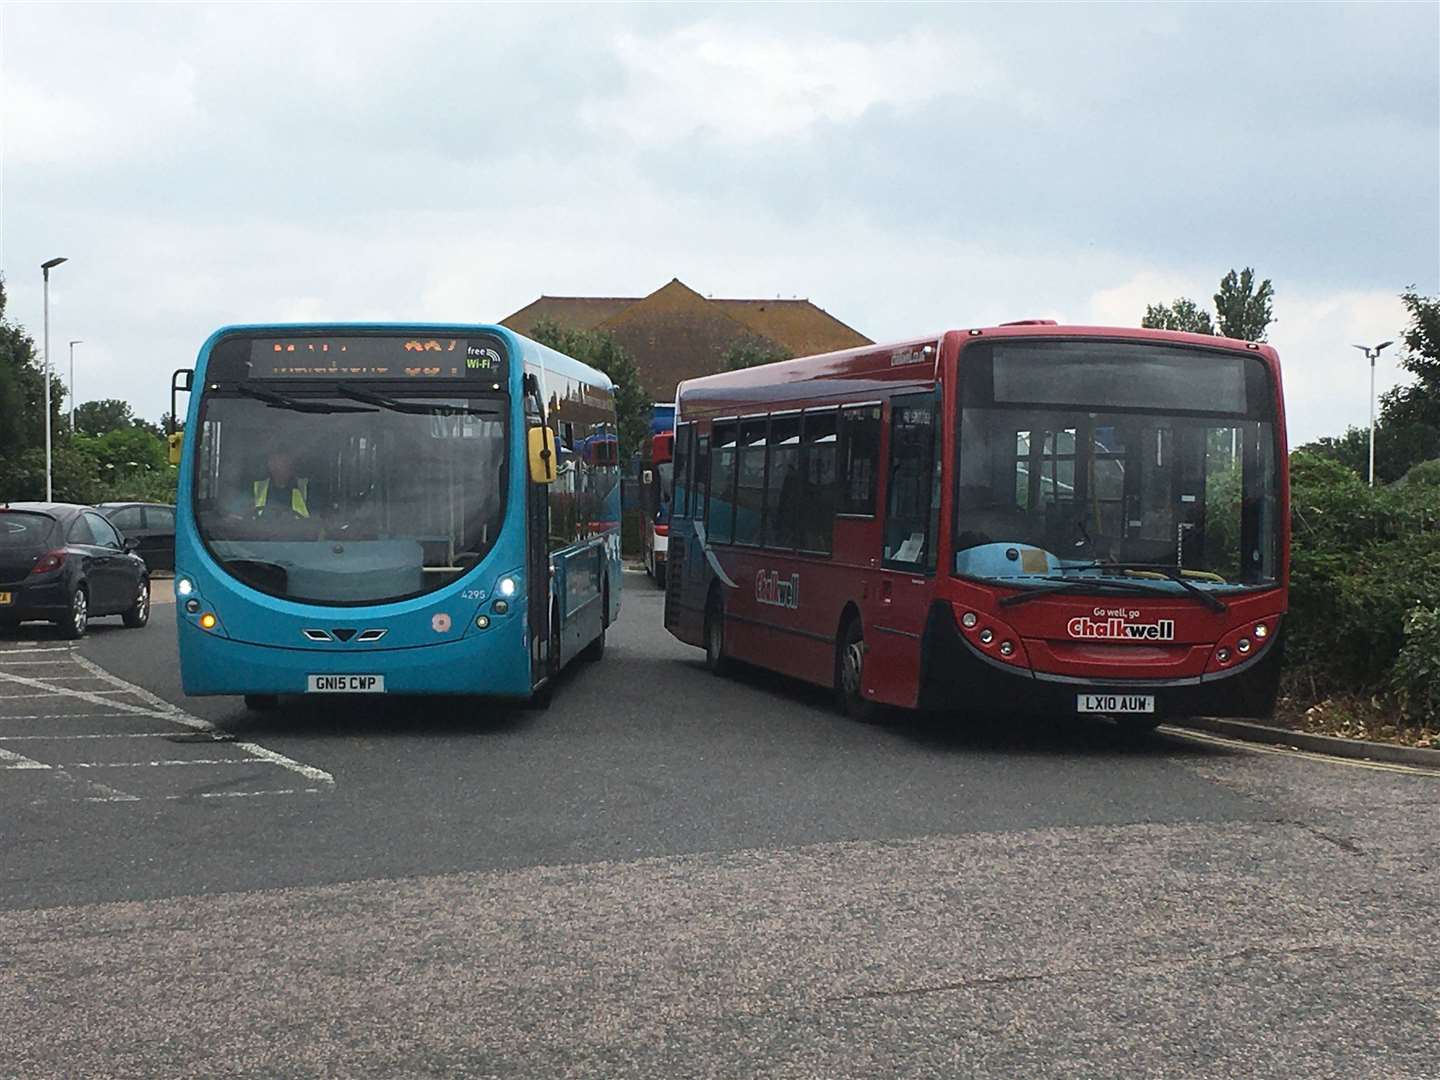 Arriva and Chalkwell buses sharing the Tesco bus stop in Sheerness